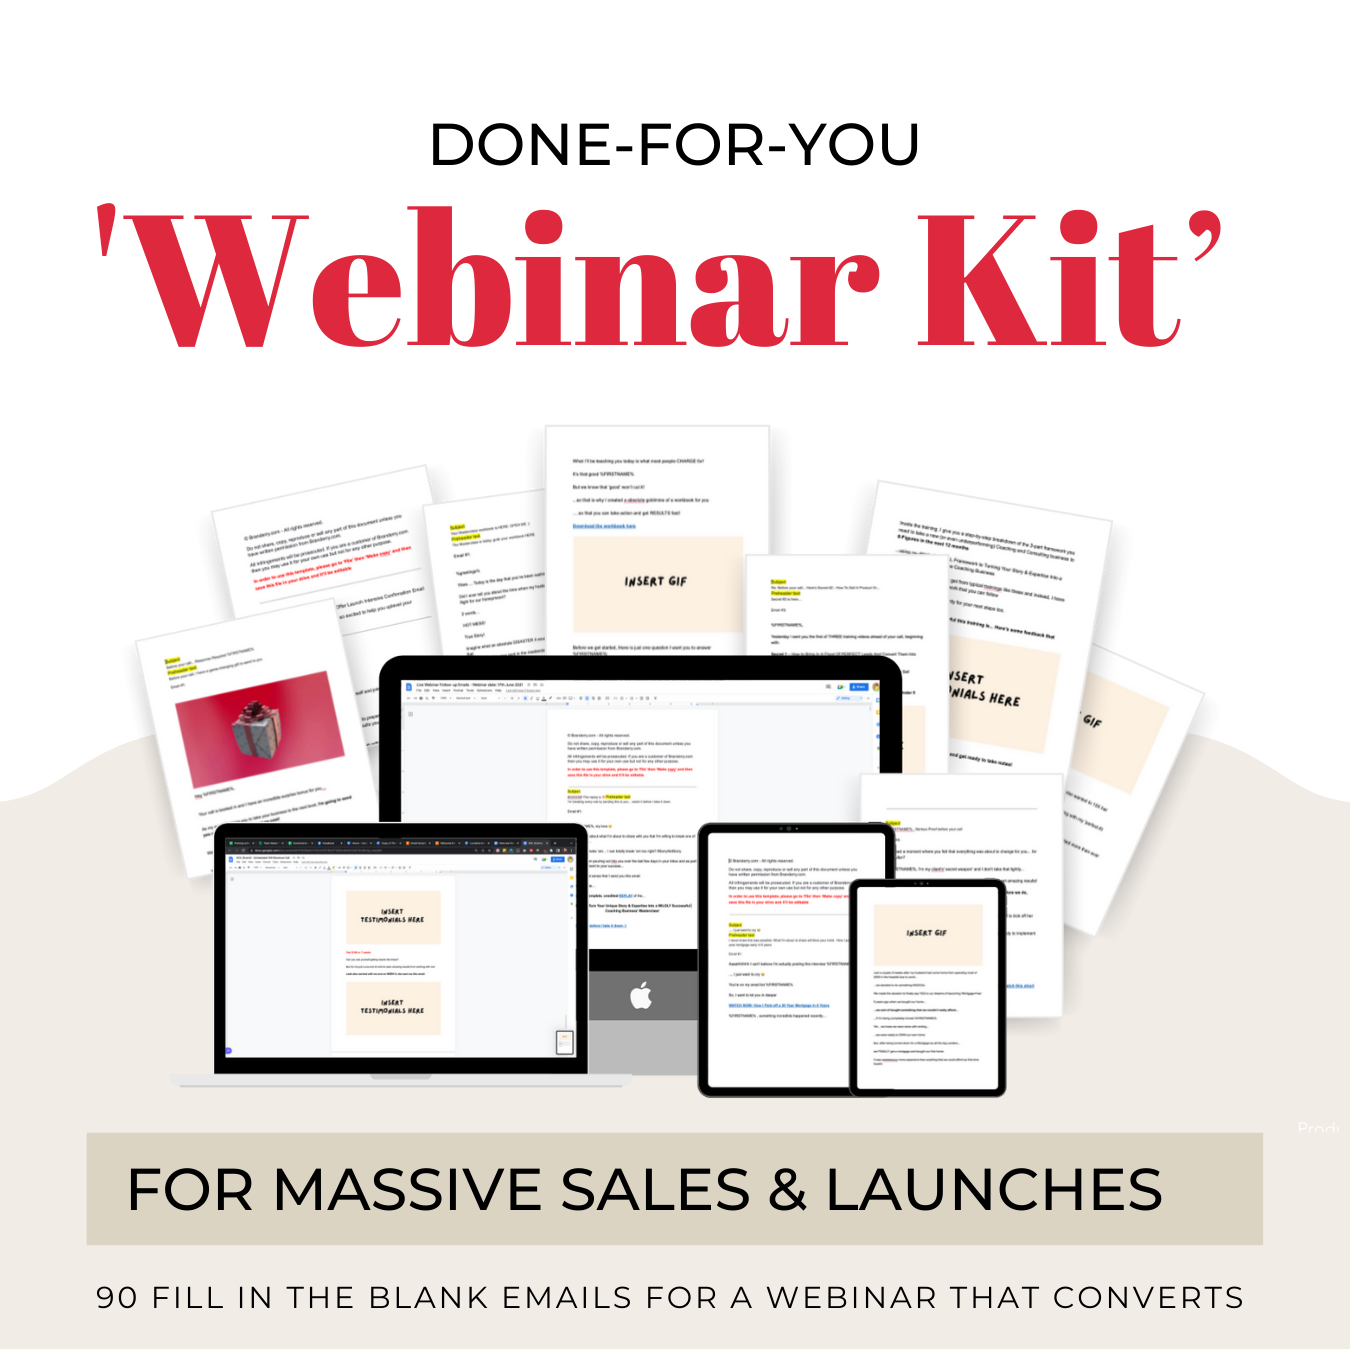 Done-For-You 'Webinar Kit’ For Massive Sales & Launches